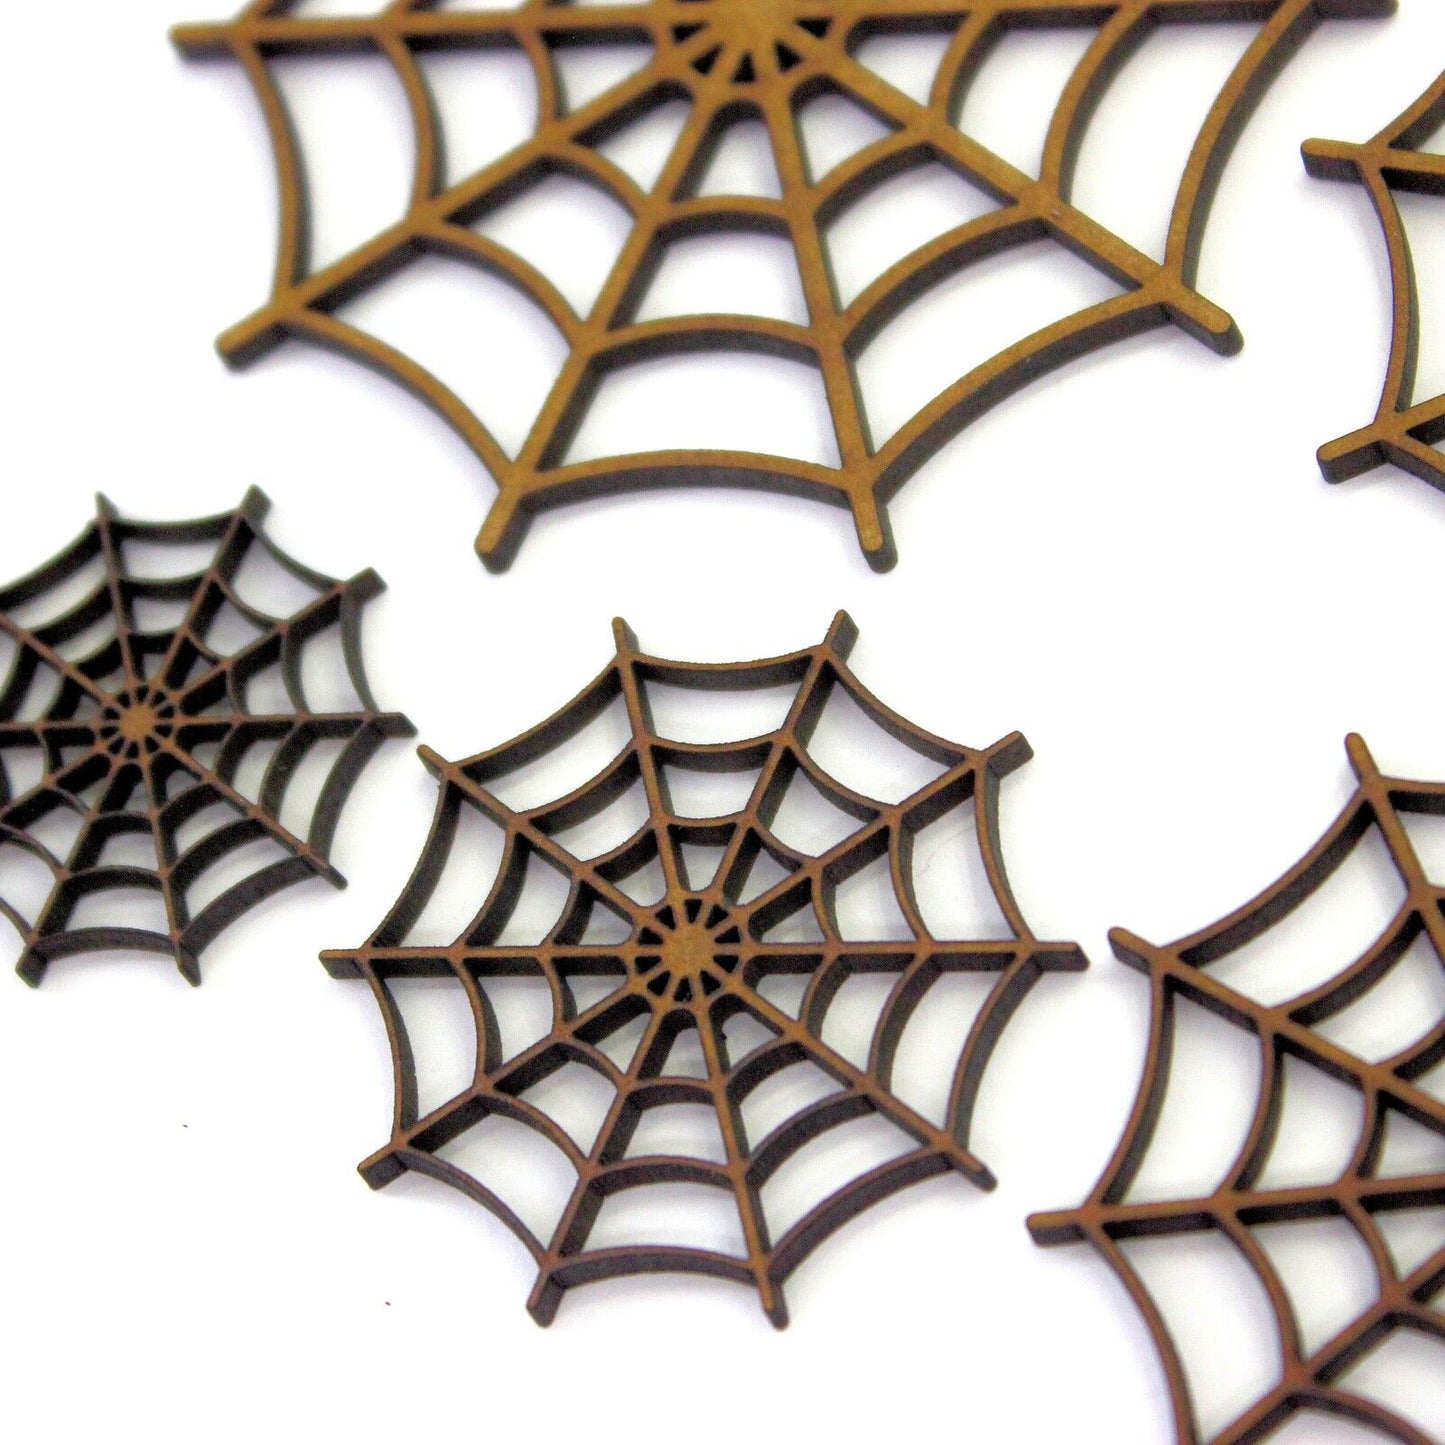 Spider Web Craft Shape. Various Sizes 30mm - 200mm. 2mm MDF. Halloween, Spooky